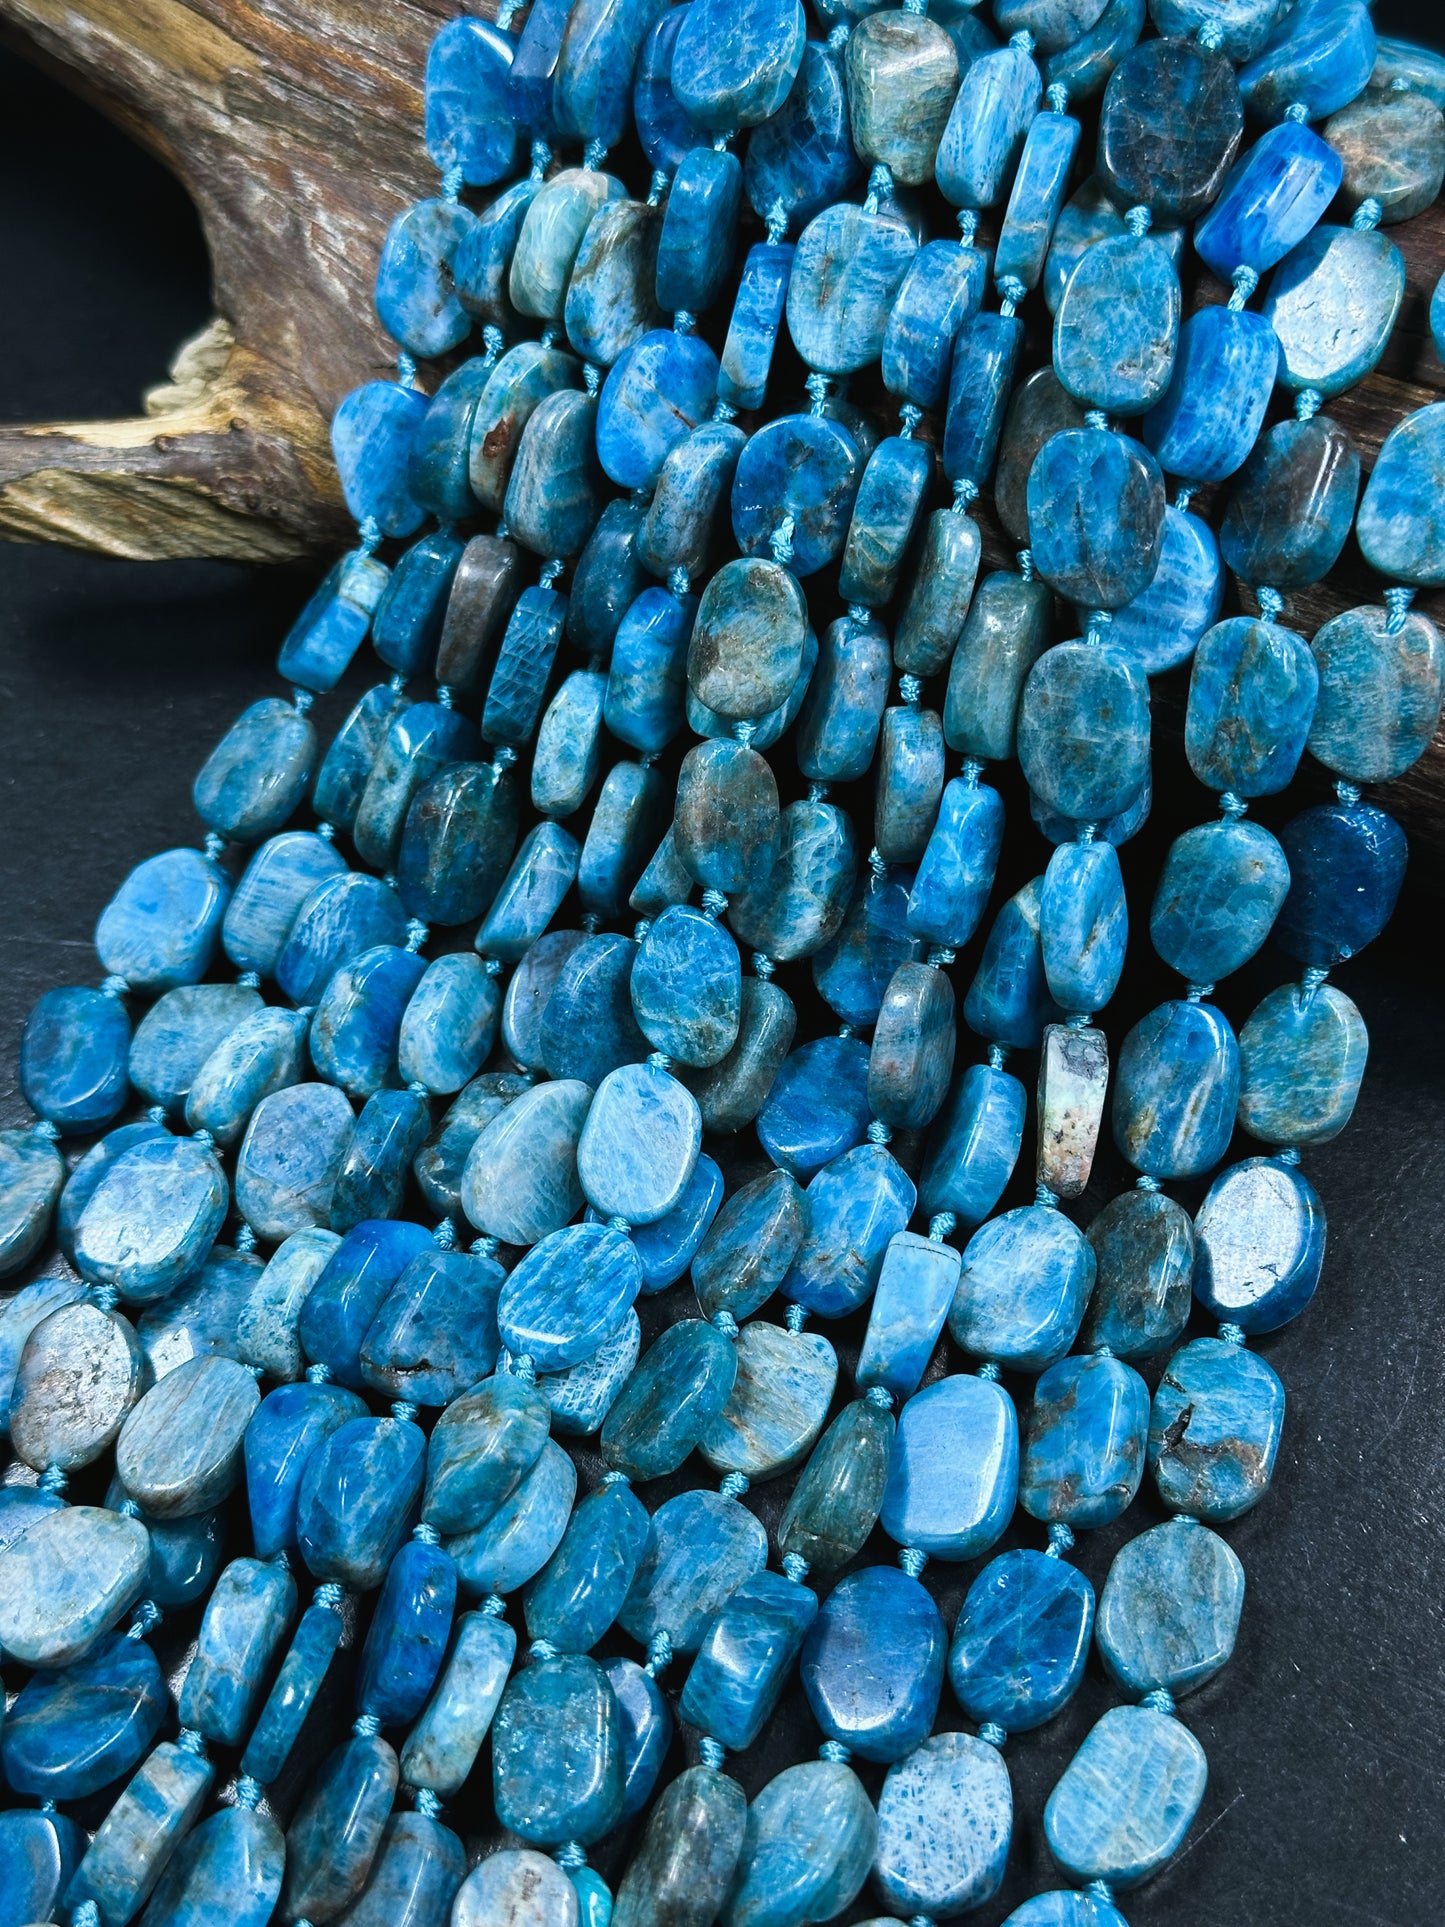 AAA Natural Apatite Gemstone Bead 16x11mm Oval Tablet Shape Bead, Beautiful Natural Blue Color Apatite Beads Excellent Quality 15.5" Strand